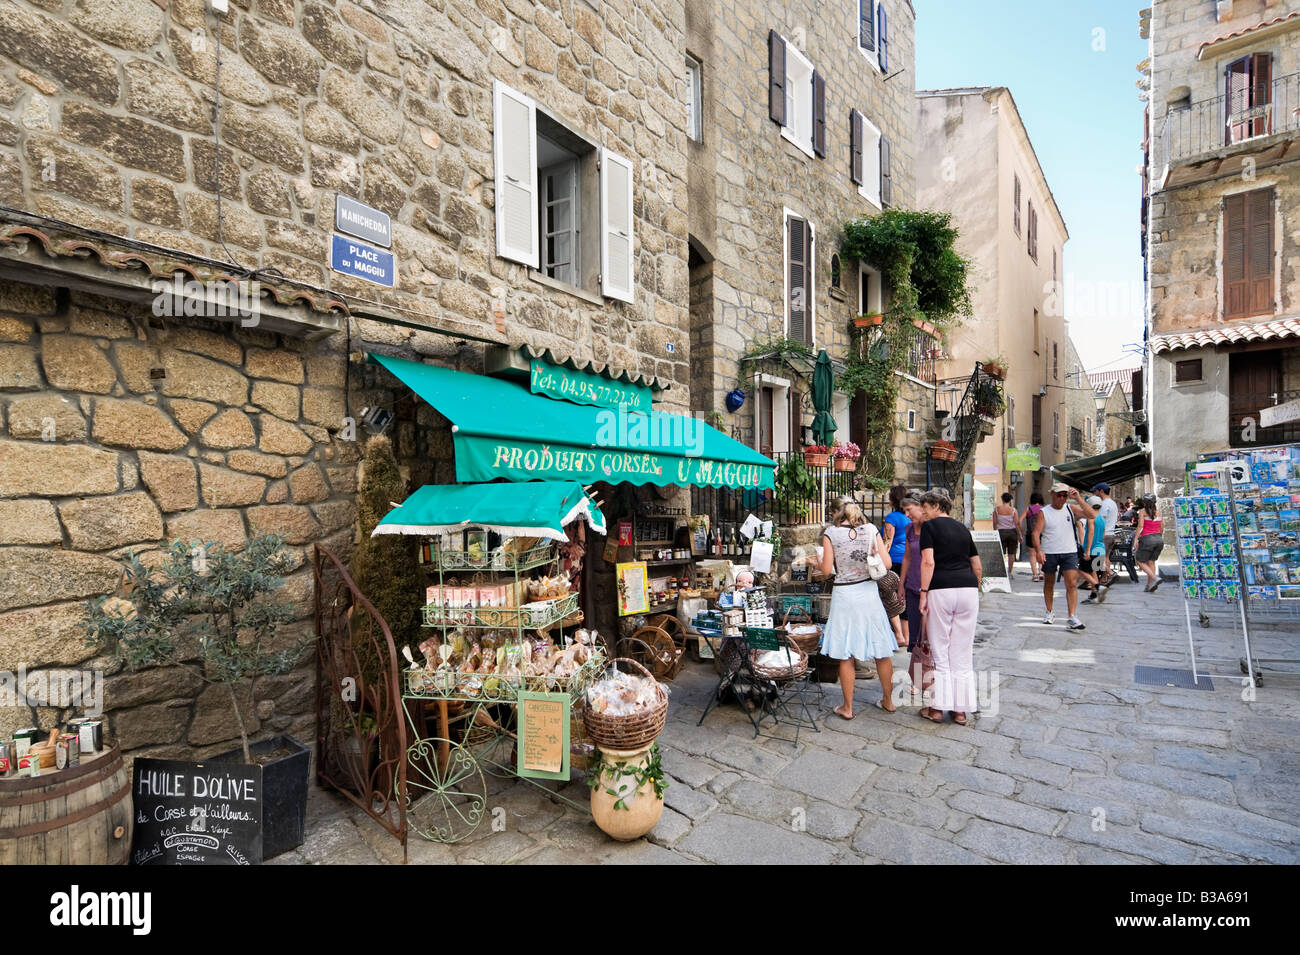 Shop selling traditional Corsican products, Place du Maggiu, Vieille Ville (Old Town), Sartene, Alta Rocca, Corsica, France Stock Photo